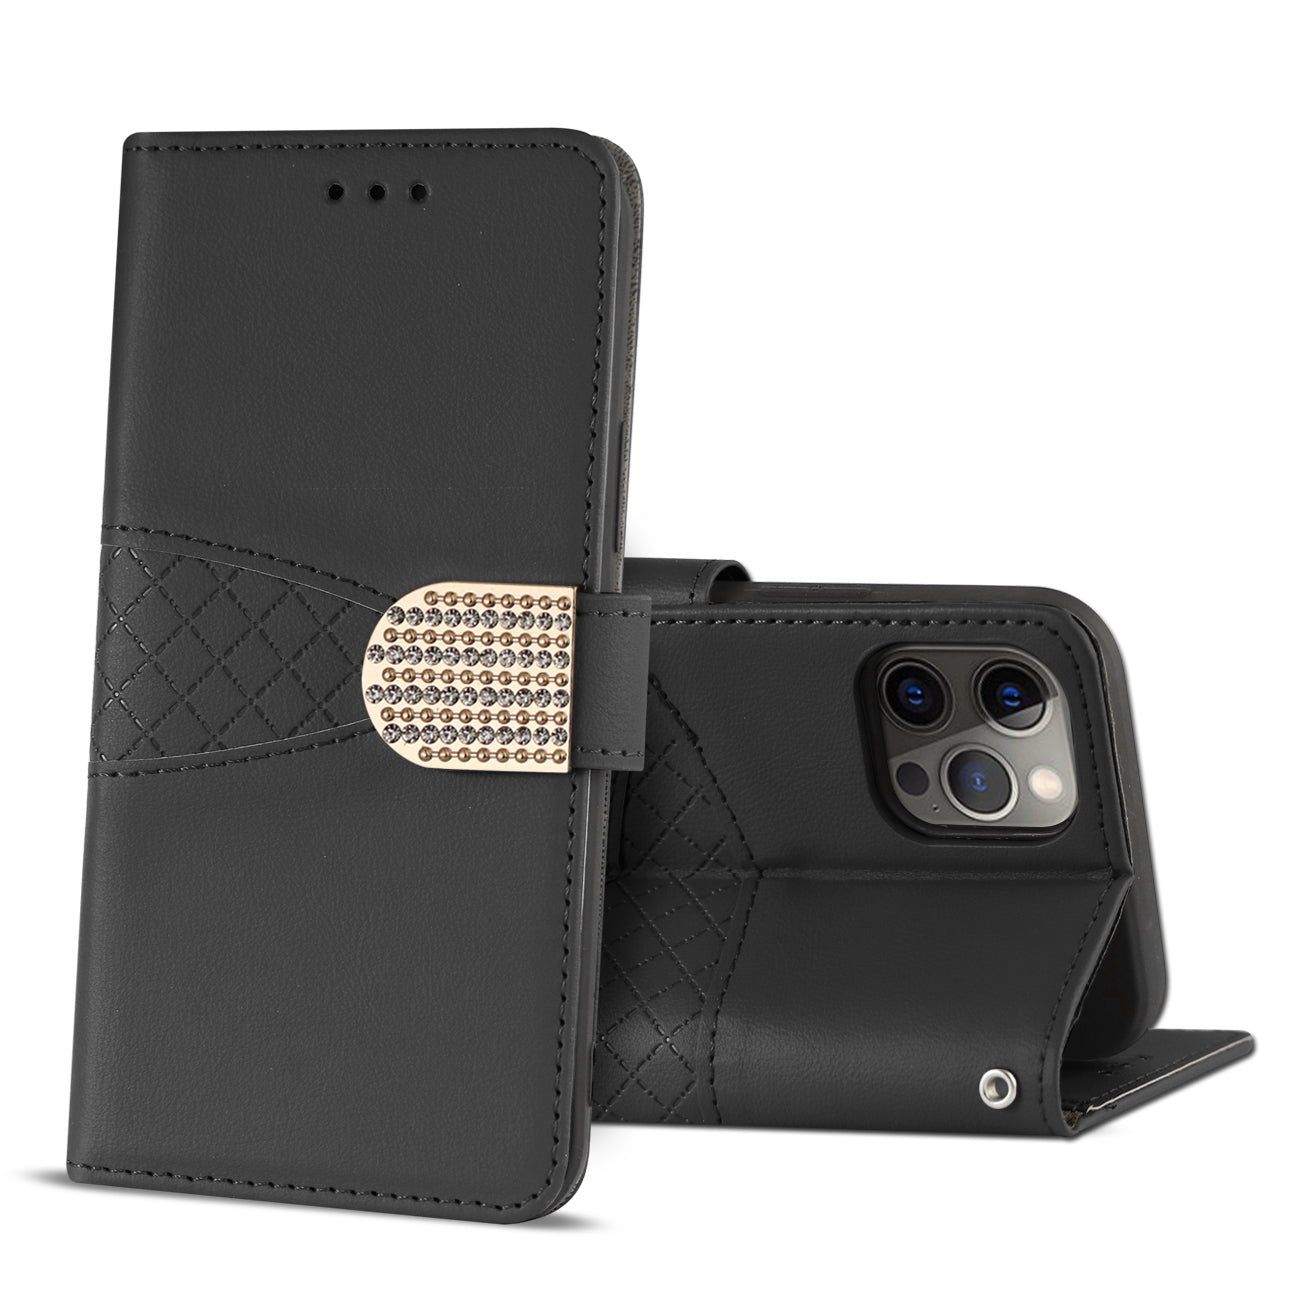 Reiko 3-In-1 Wallet Case for IPHONE 12/ IPHONE 12 PRO In Black